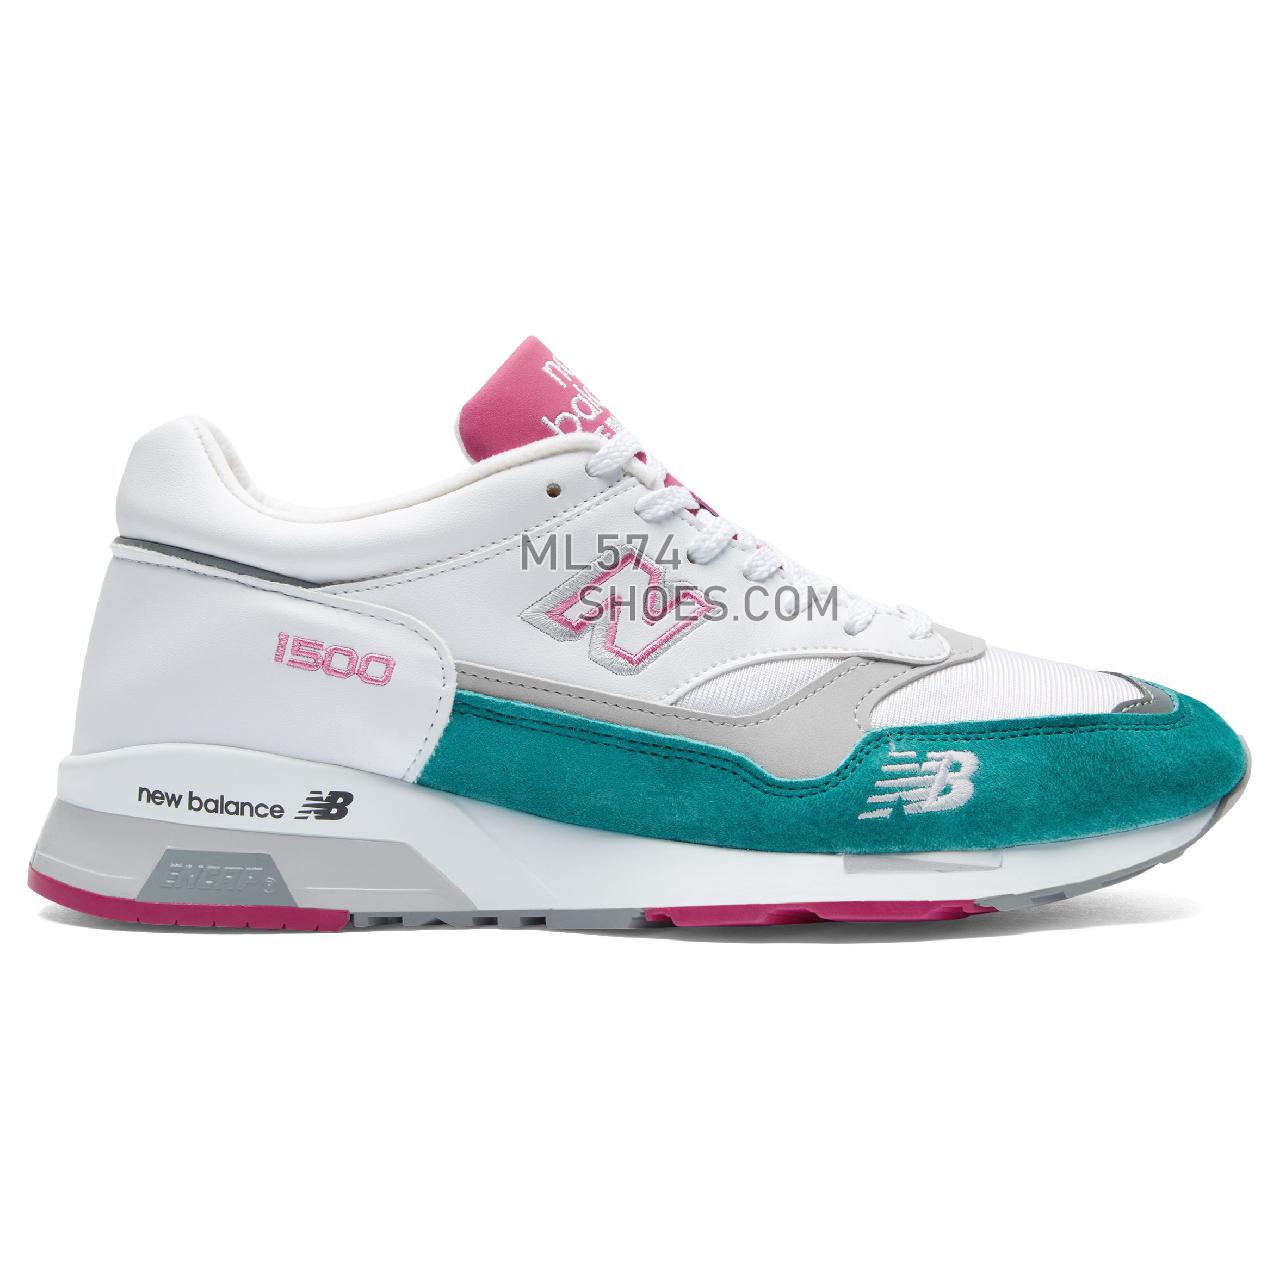 New Balance Made in UK 1500 - Men's 1500 Made in UK Classic M1500-PS - White with Teal and Pink - M1500WTP